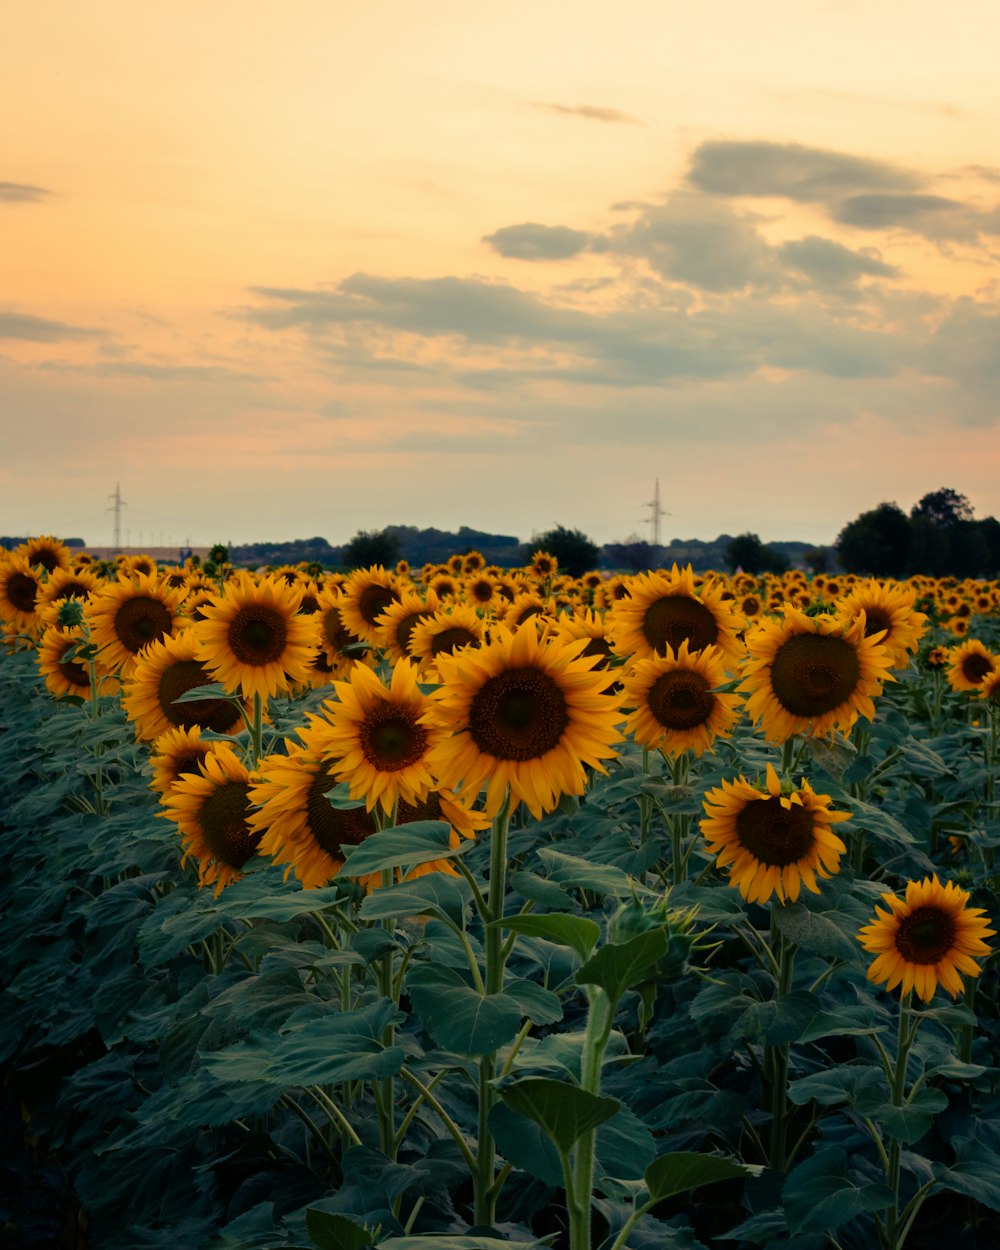 a large field of sunflowers with a sunset in the background